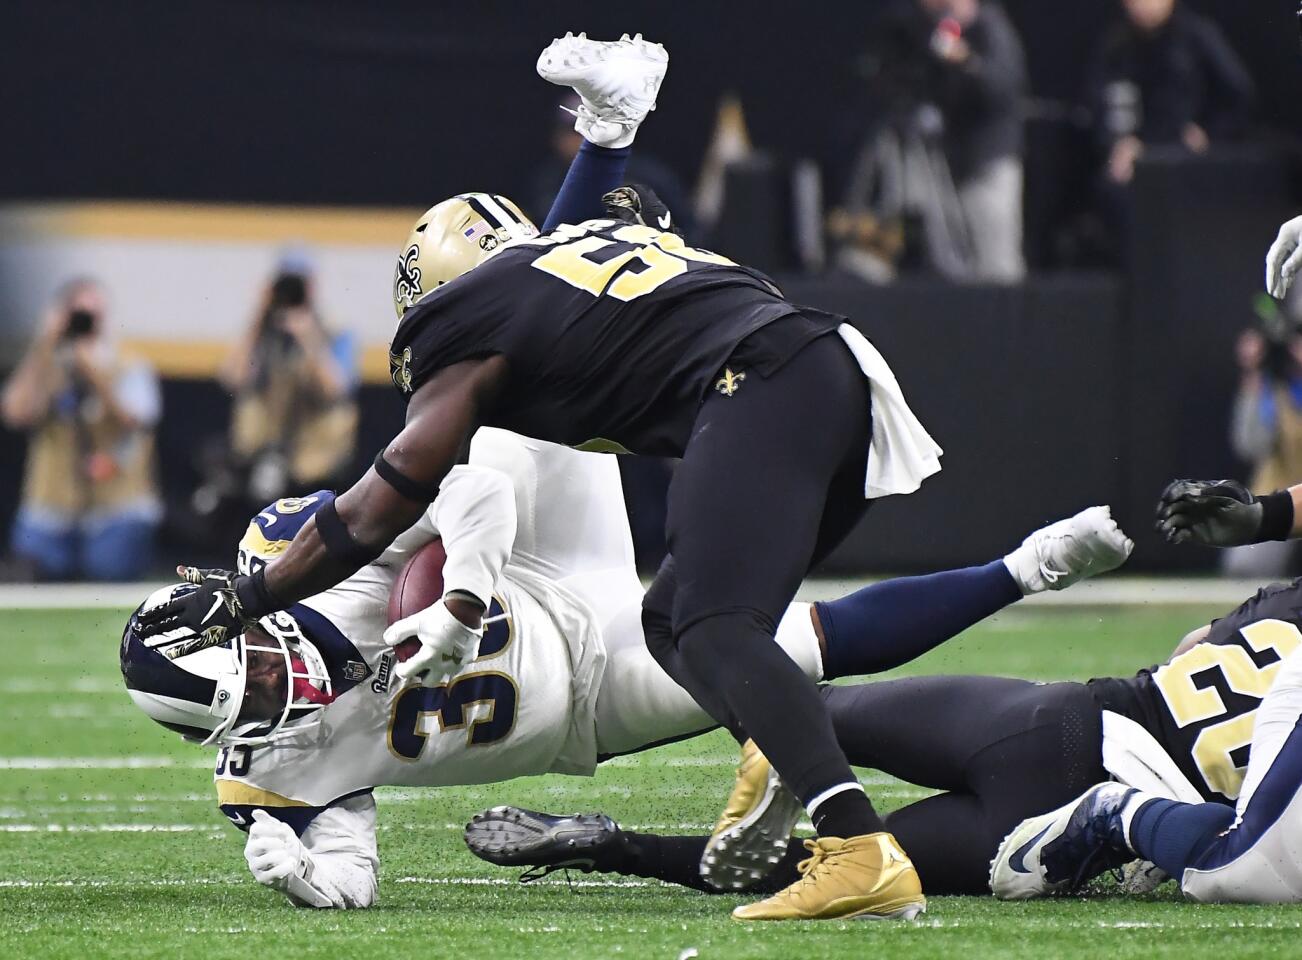 Rams running back C.J. Anderson is upended by the New Orleans Saints defense in the third quarter in the NFC Championship at the Superdome in New Orleans Sunday.